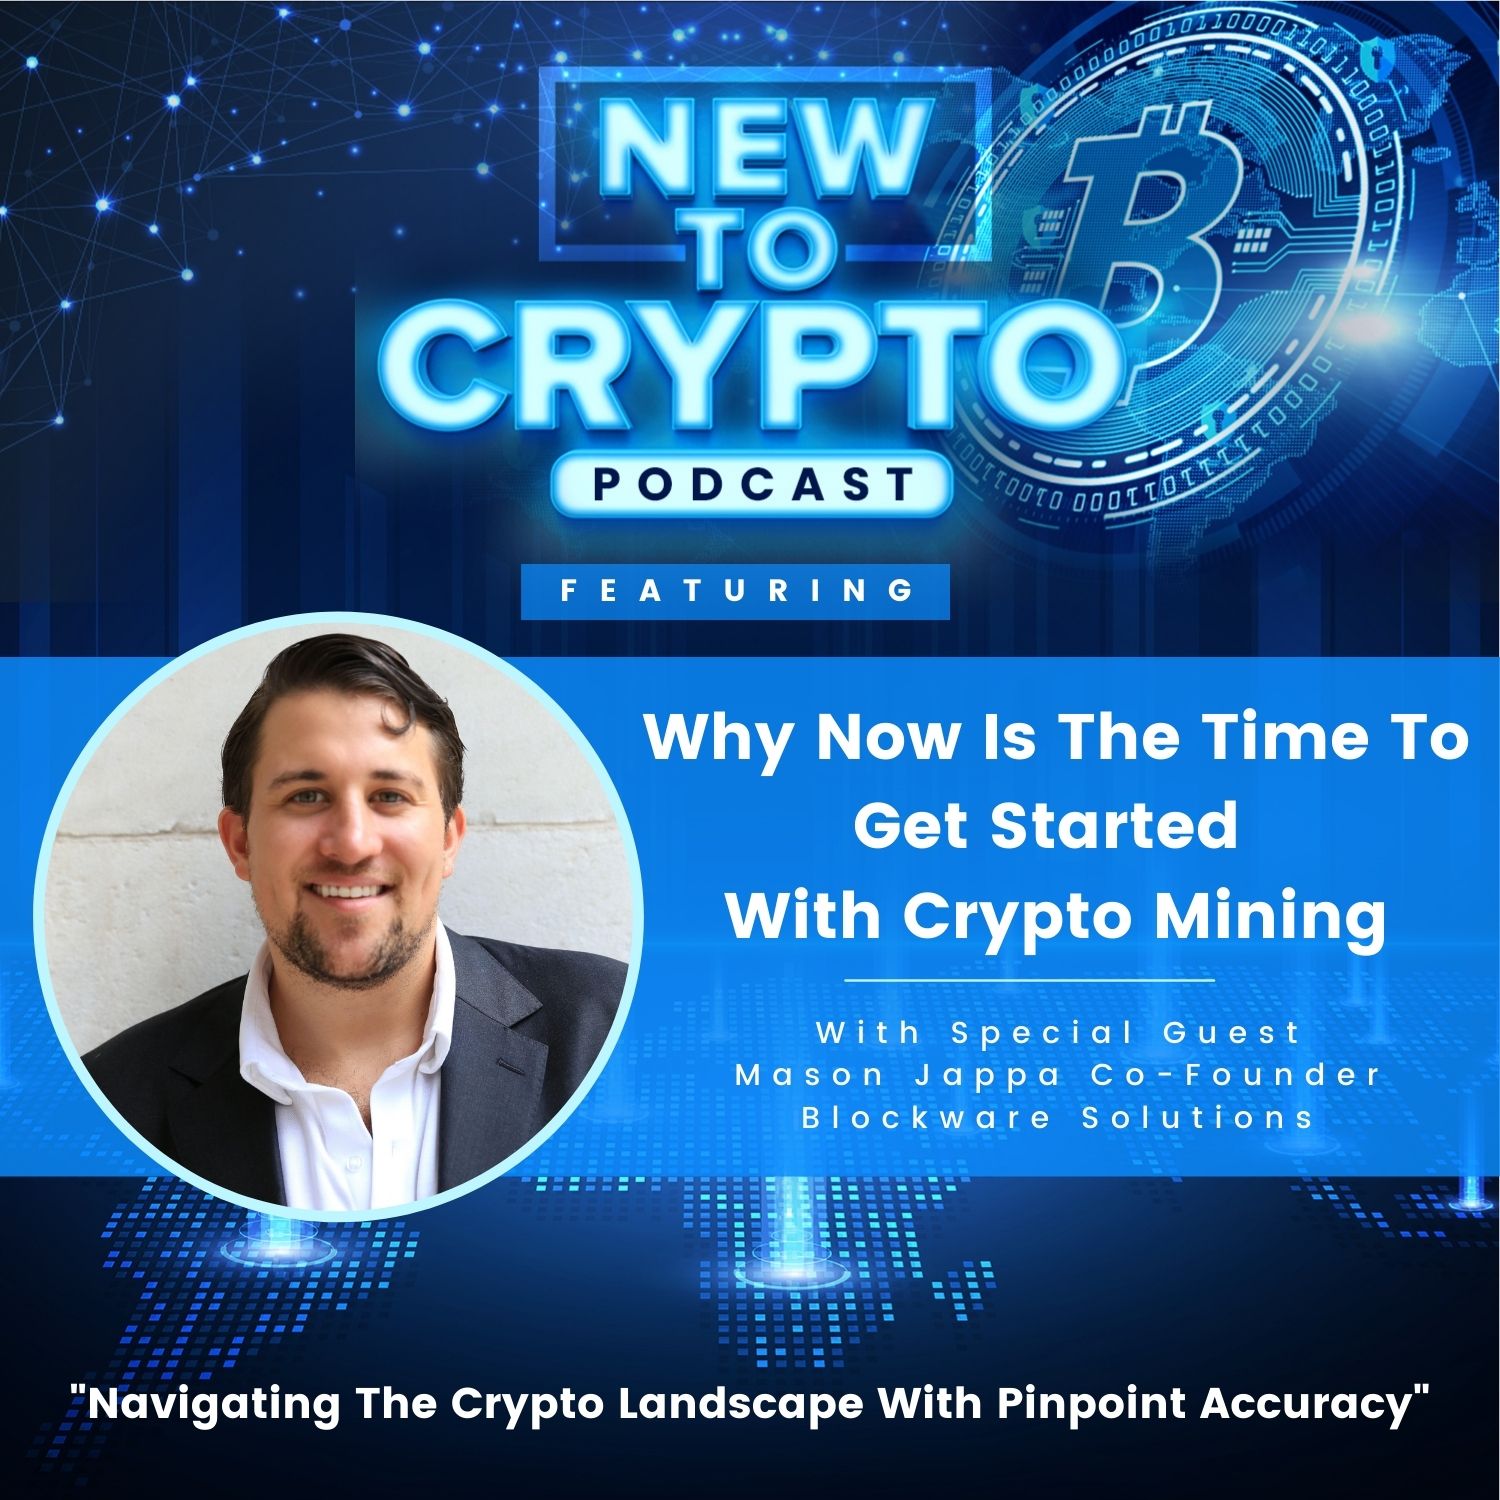 Why Now Is The Time To Get Started With Crypto Mining With Guest Mason Jappa Co-Founder of Blockware Solutions image